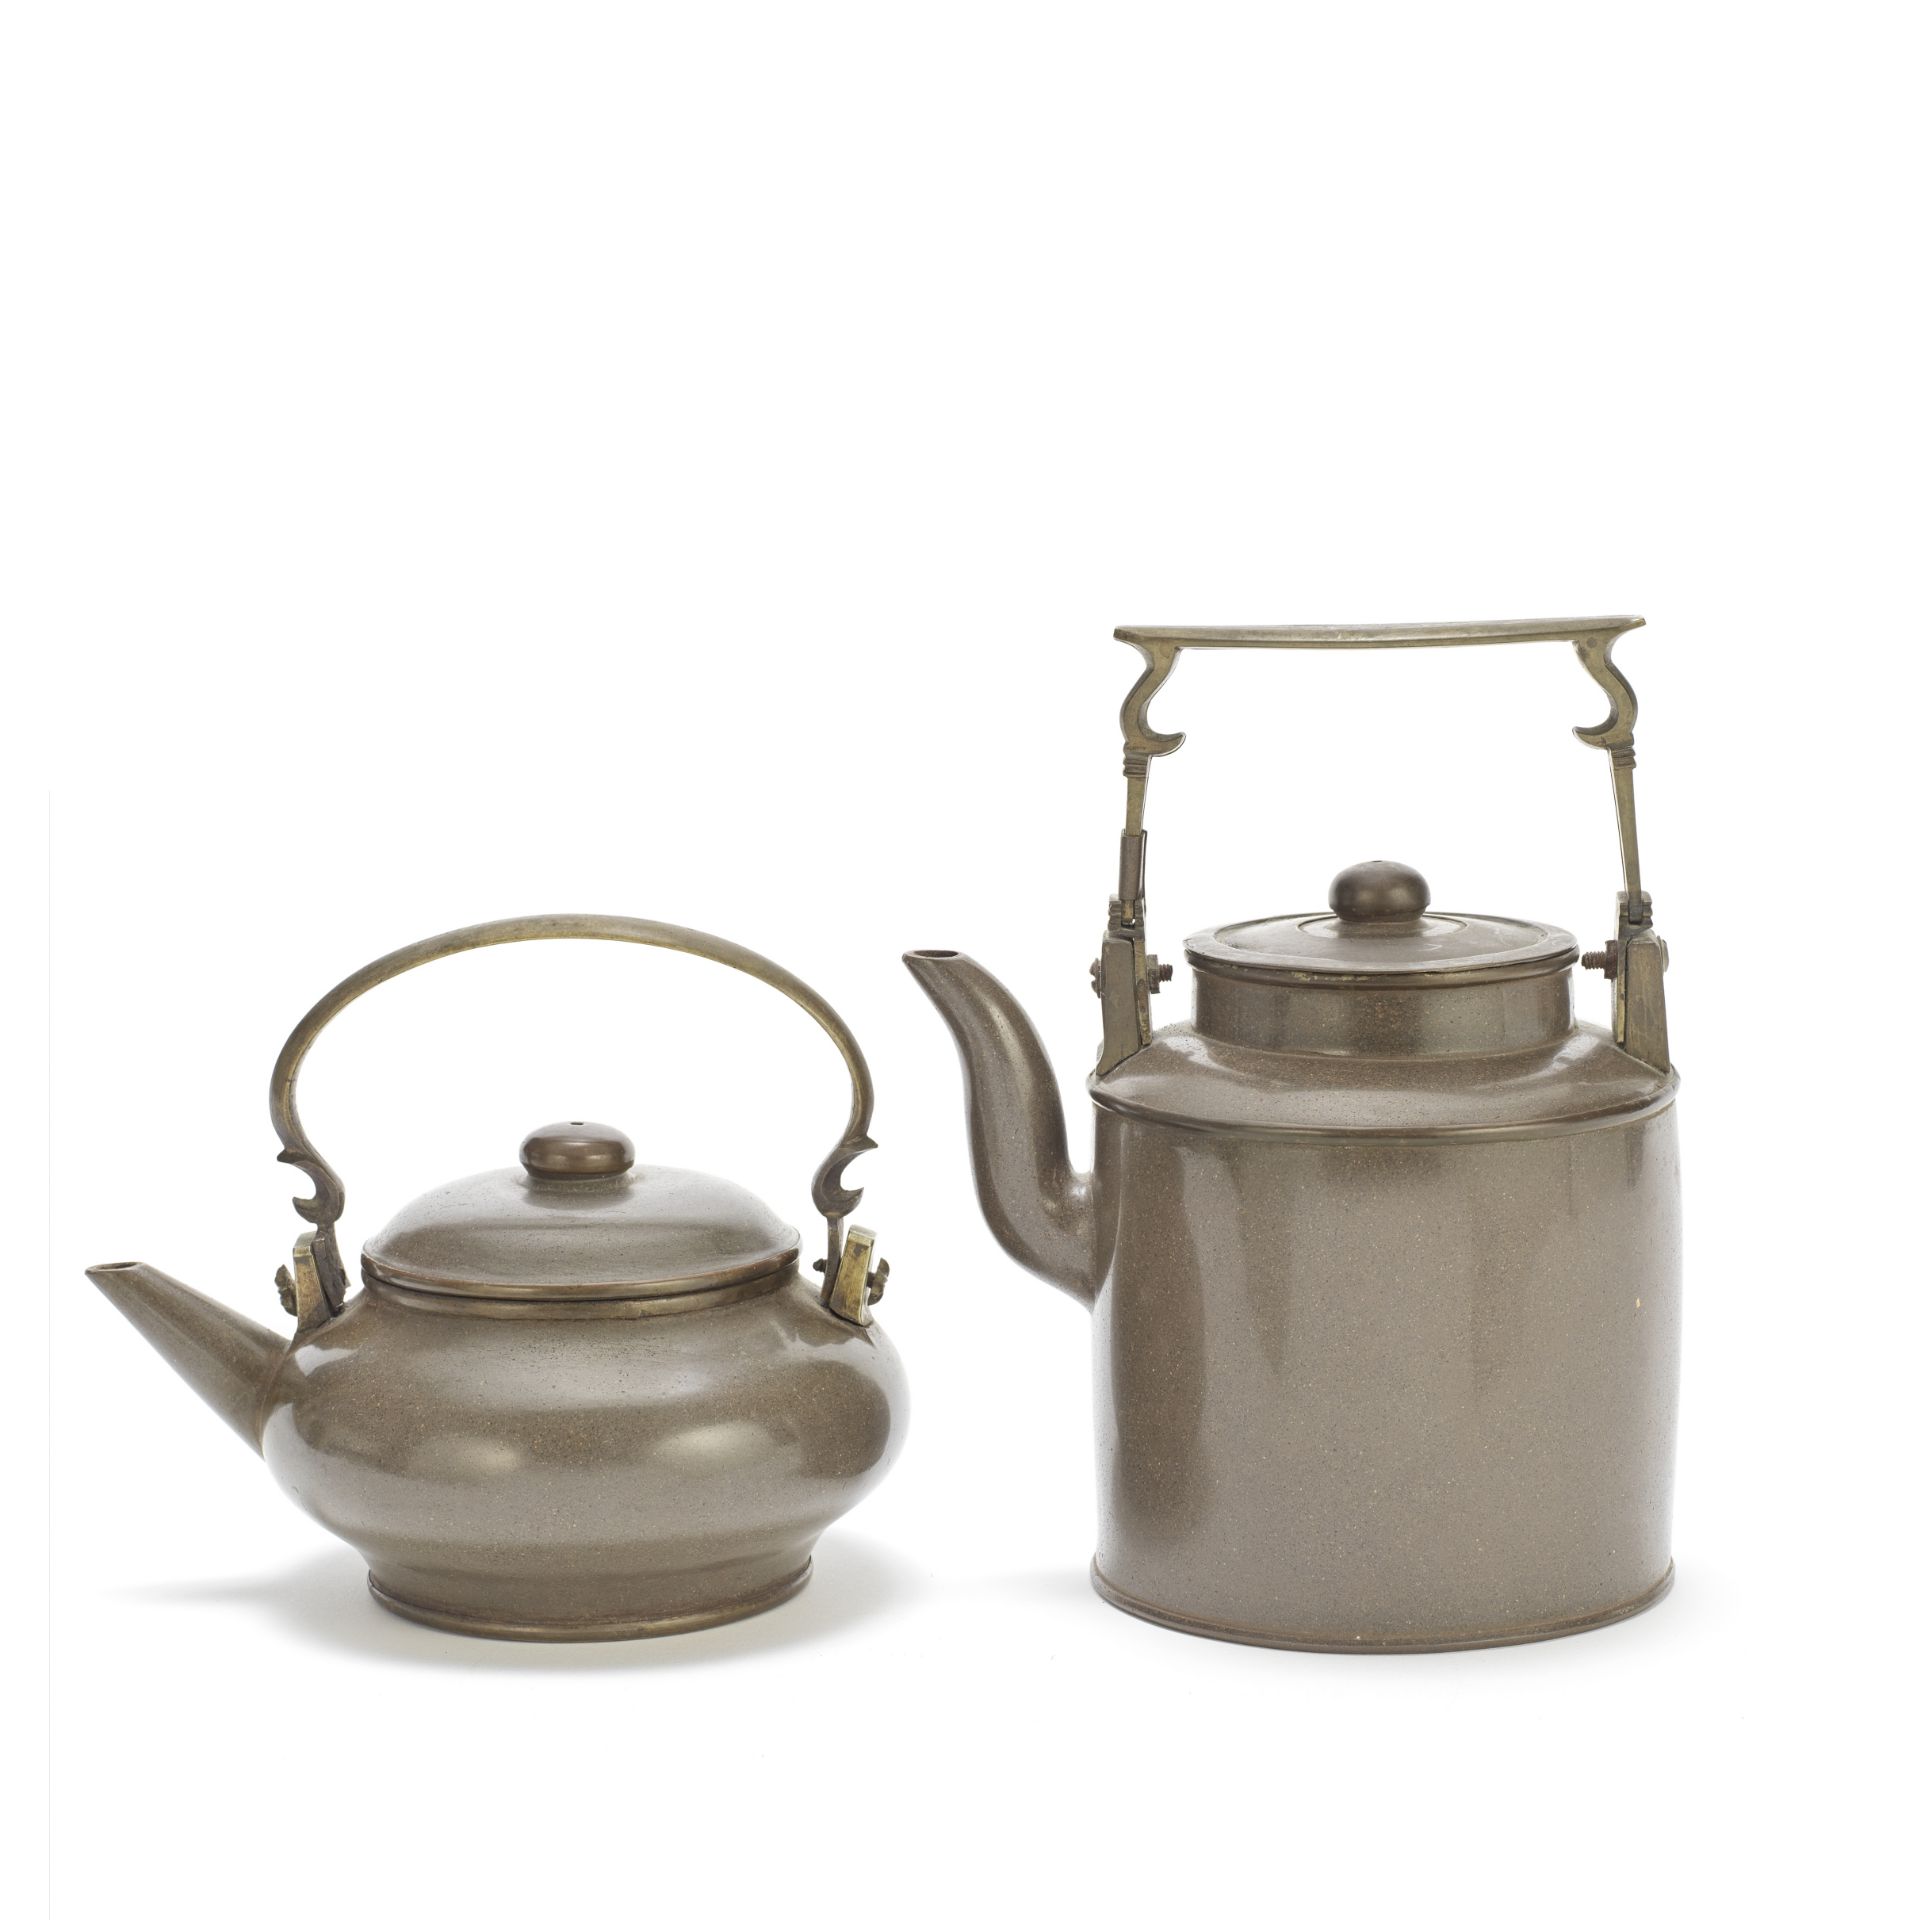 TWO 'THAI MARKET' YIXING TEAPOTS AND COVERS 19th century (2)